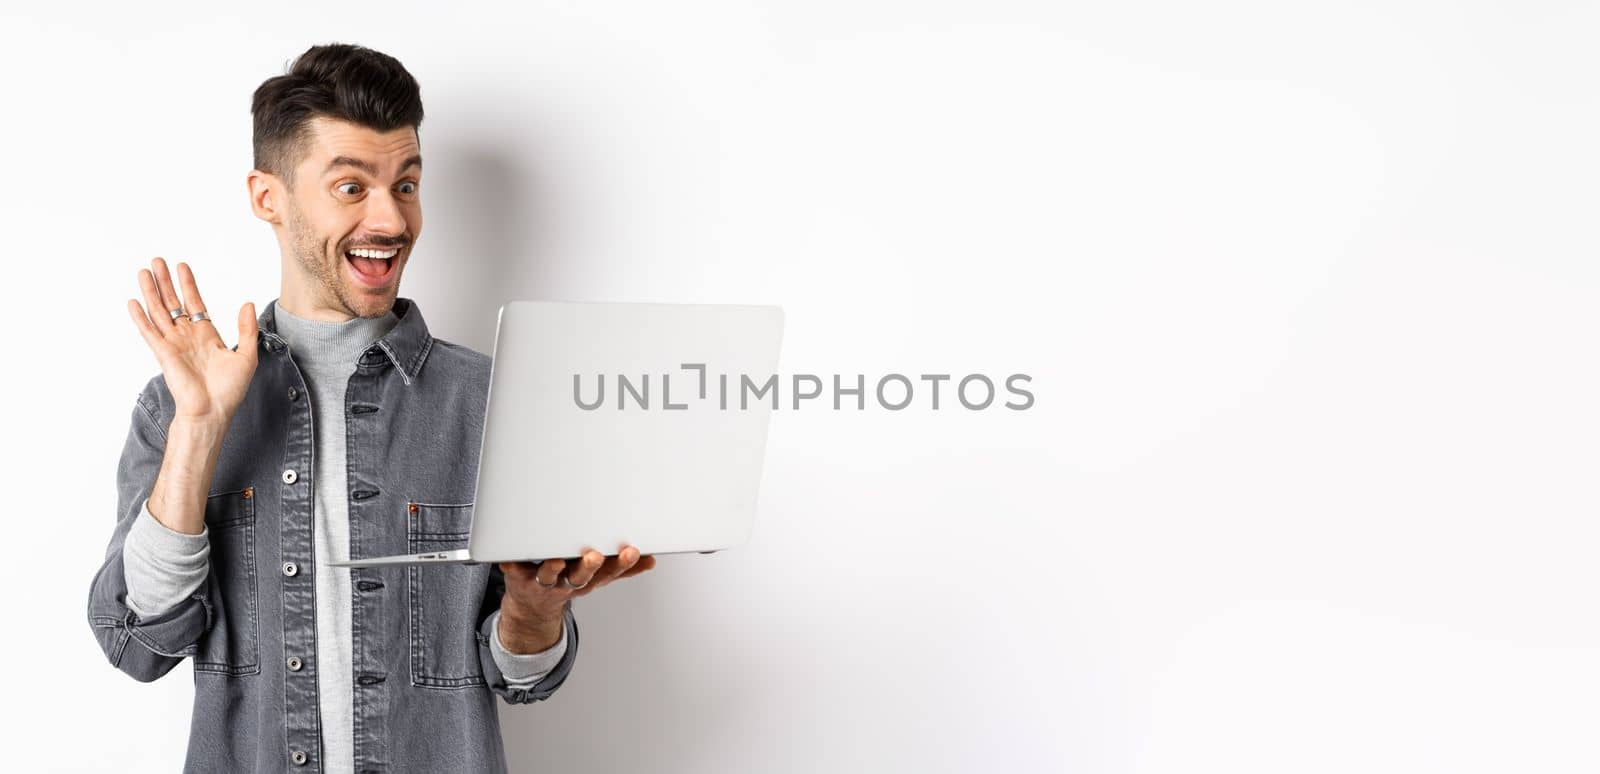 Excited man waiving hand at laptop, video chatting on computer and smiling friendly, standing on white background.